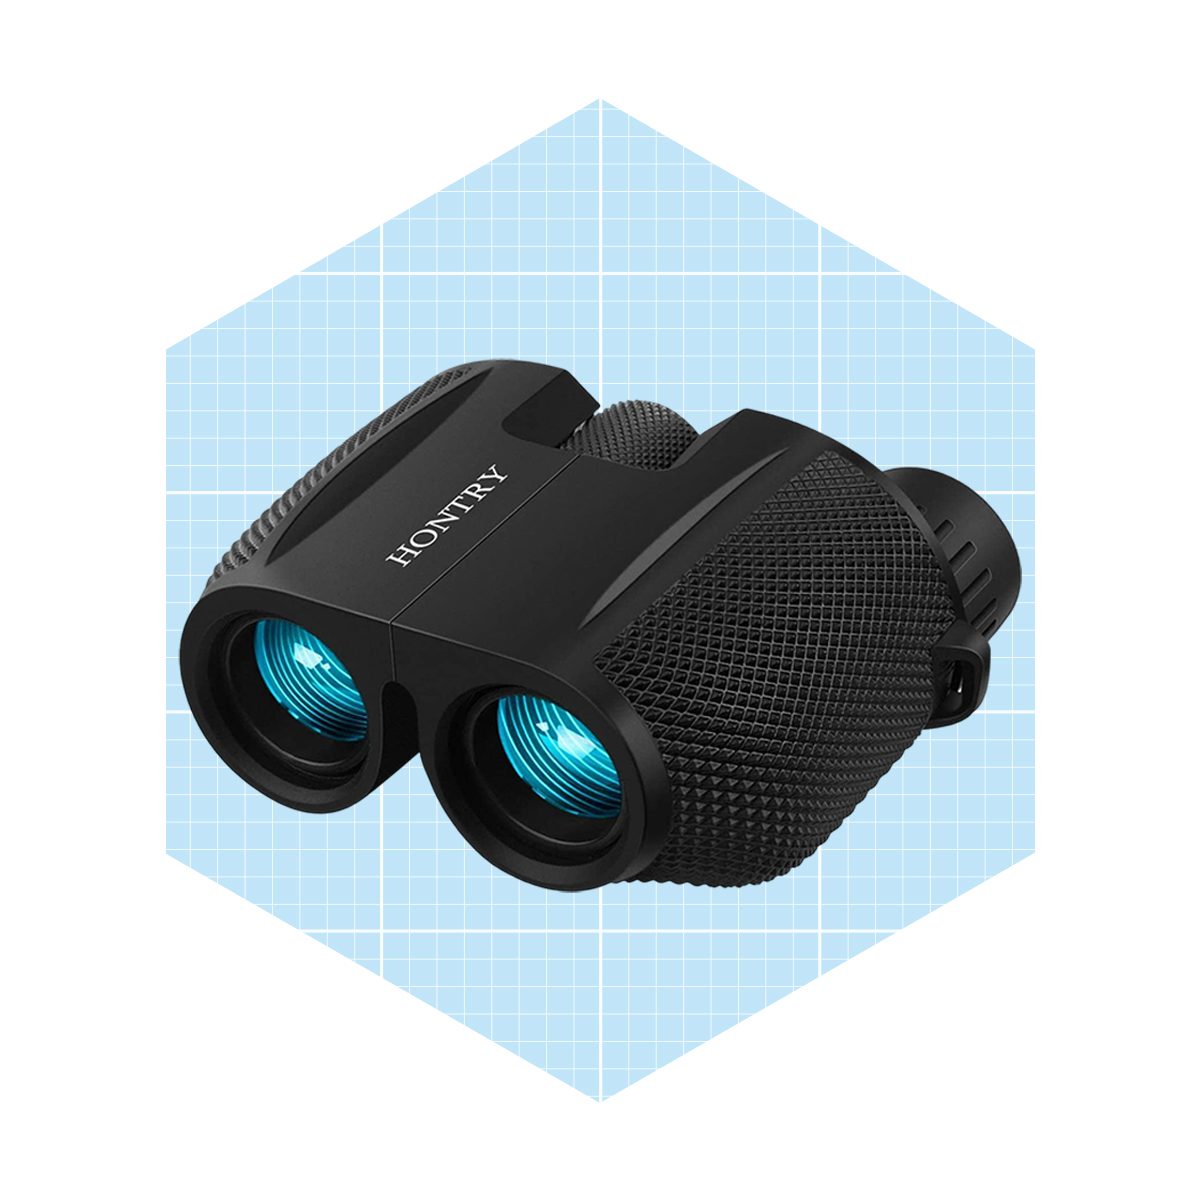 <p>This pair of <a href="https://www.amazon.com/Binoculars-Compact-Watching-Theater-Concerts/dp/B07Q1GHB5X" rel="noopener noreferrer">compact binoculars</a> is perfect for sightseeing and exploring new destinations. It features a 25mm objective lens with powerful 12x magnification, giving you sharp and clear images full of bright, vivid colors. These binoculars are easy to adjust and focus yet are lightweight and compact. Bring them when bird watching, visiting a national park or exploring a new city.</p> <p class="listicle-page__cta-button-shop"><a class="shop-btn" href="https://www.amazon.com/Binoculars-Compact-Watching-Theater-Concerts/dp/B07Q1GHB5X">Shop Now</a></p>